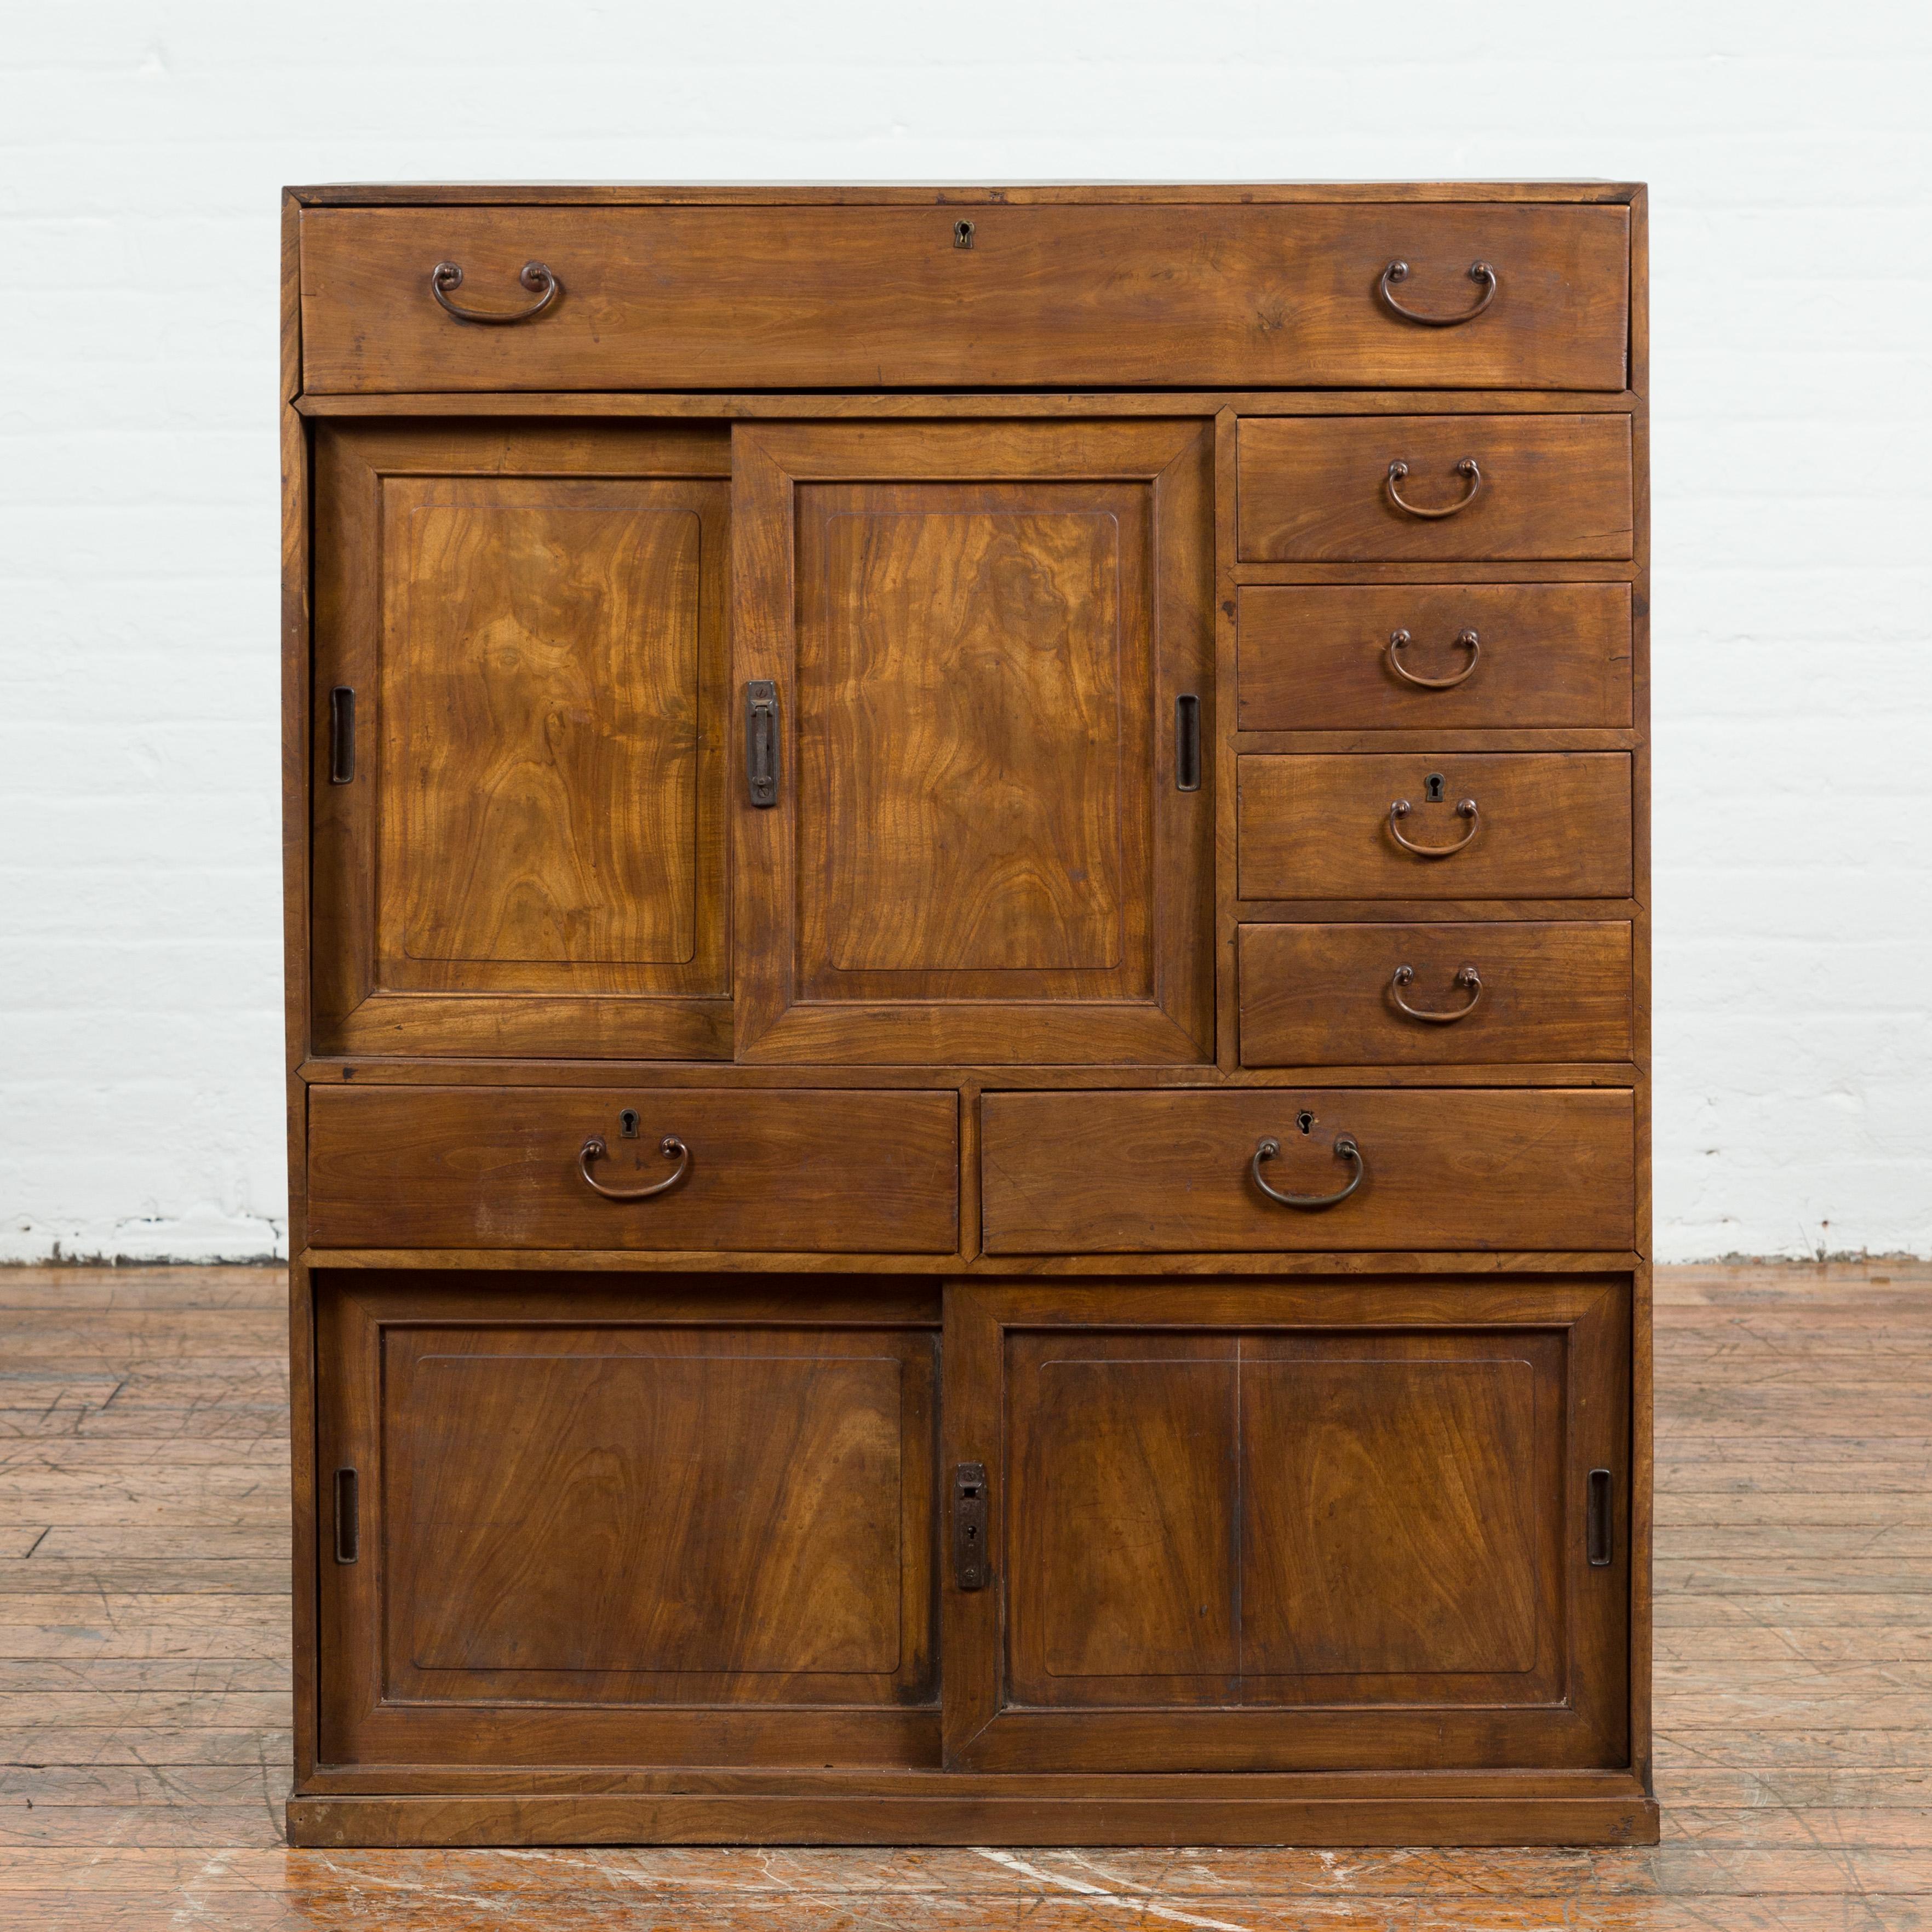 A Japanese Taisho period small cabinet from the early 20th century with sliding doors and seven drawers. Created in Japan during the early years of the 20th century, this small cabinet features seven drawers and two pairs of sliding doors offering